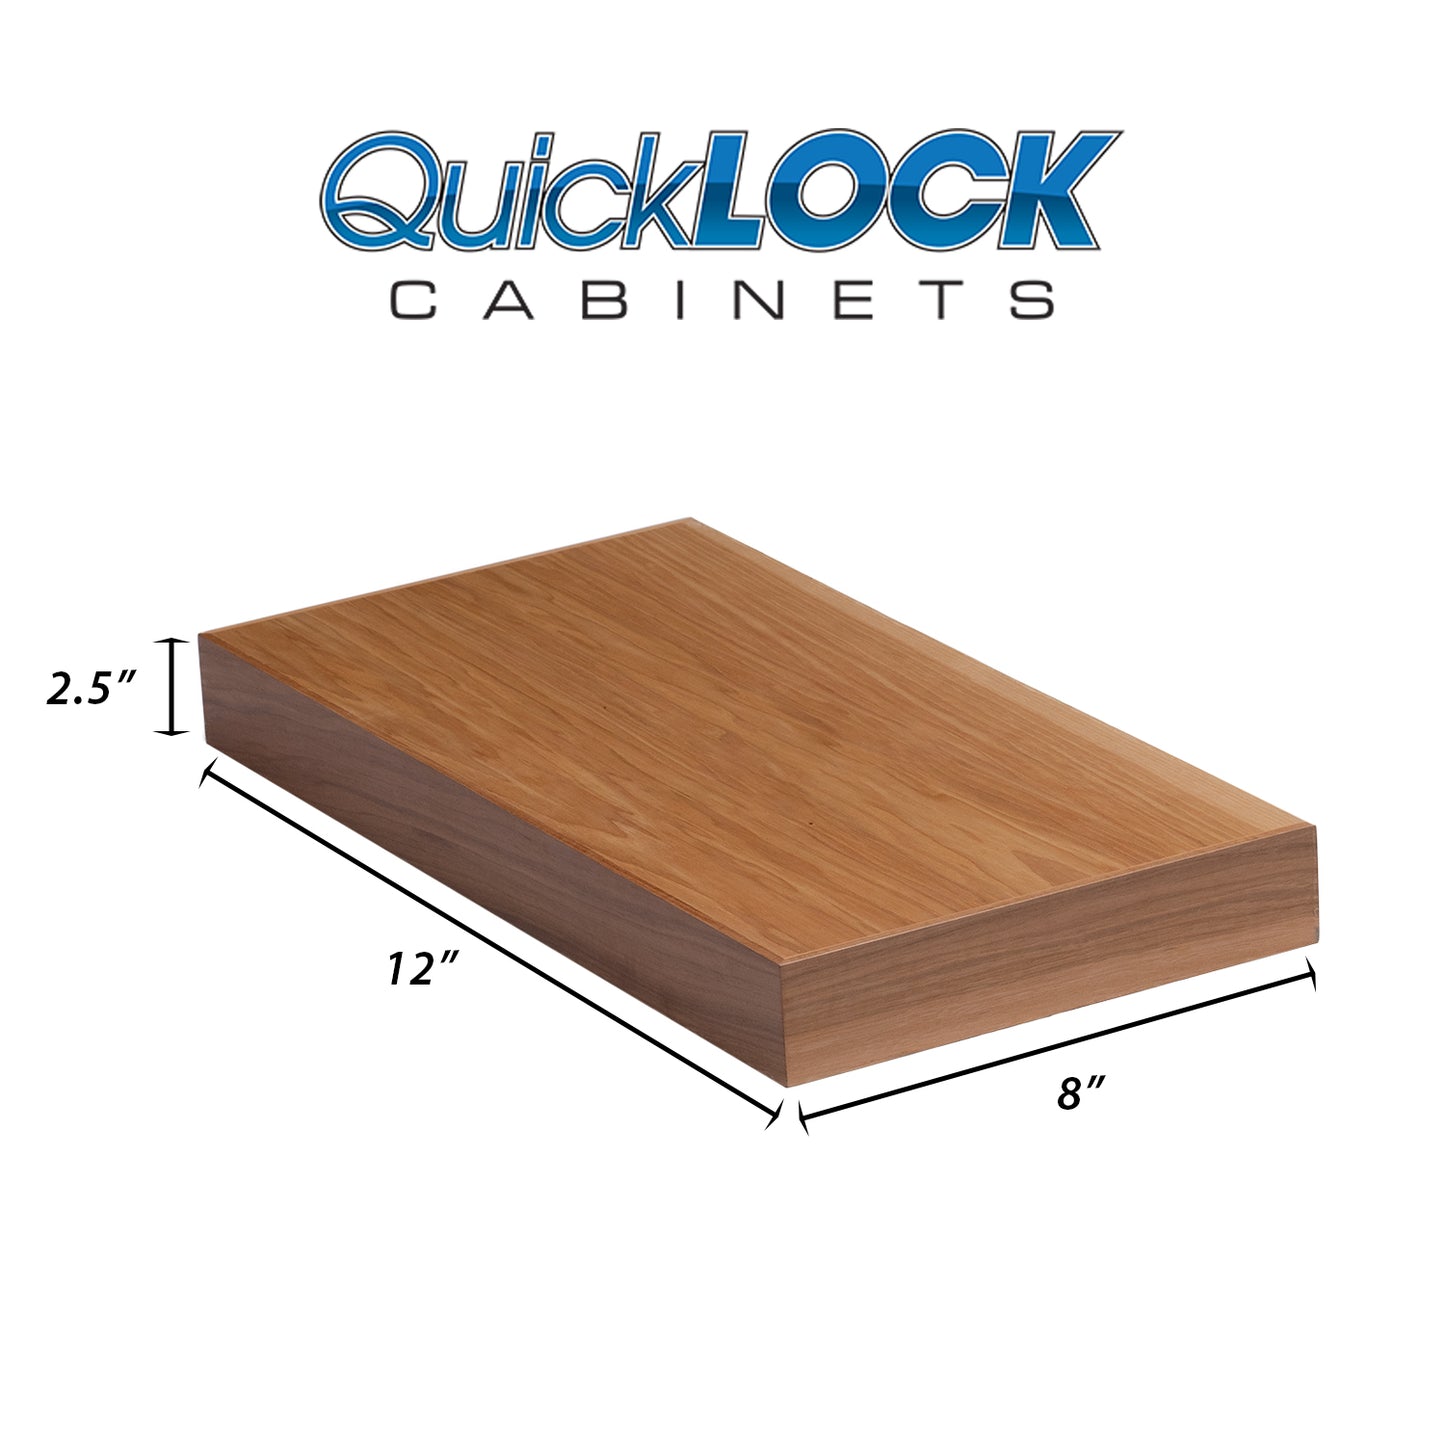 Quicklock Cabinets Floating Shelves | 2.5" Thick | Rustic Hickory, 8" D x 12" W x 2.5" H | American Made | Hardwood Bracket | Complete Shelf Unit